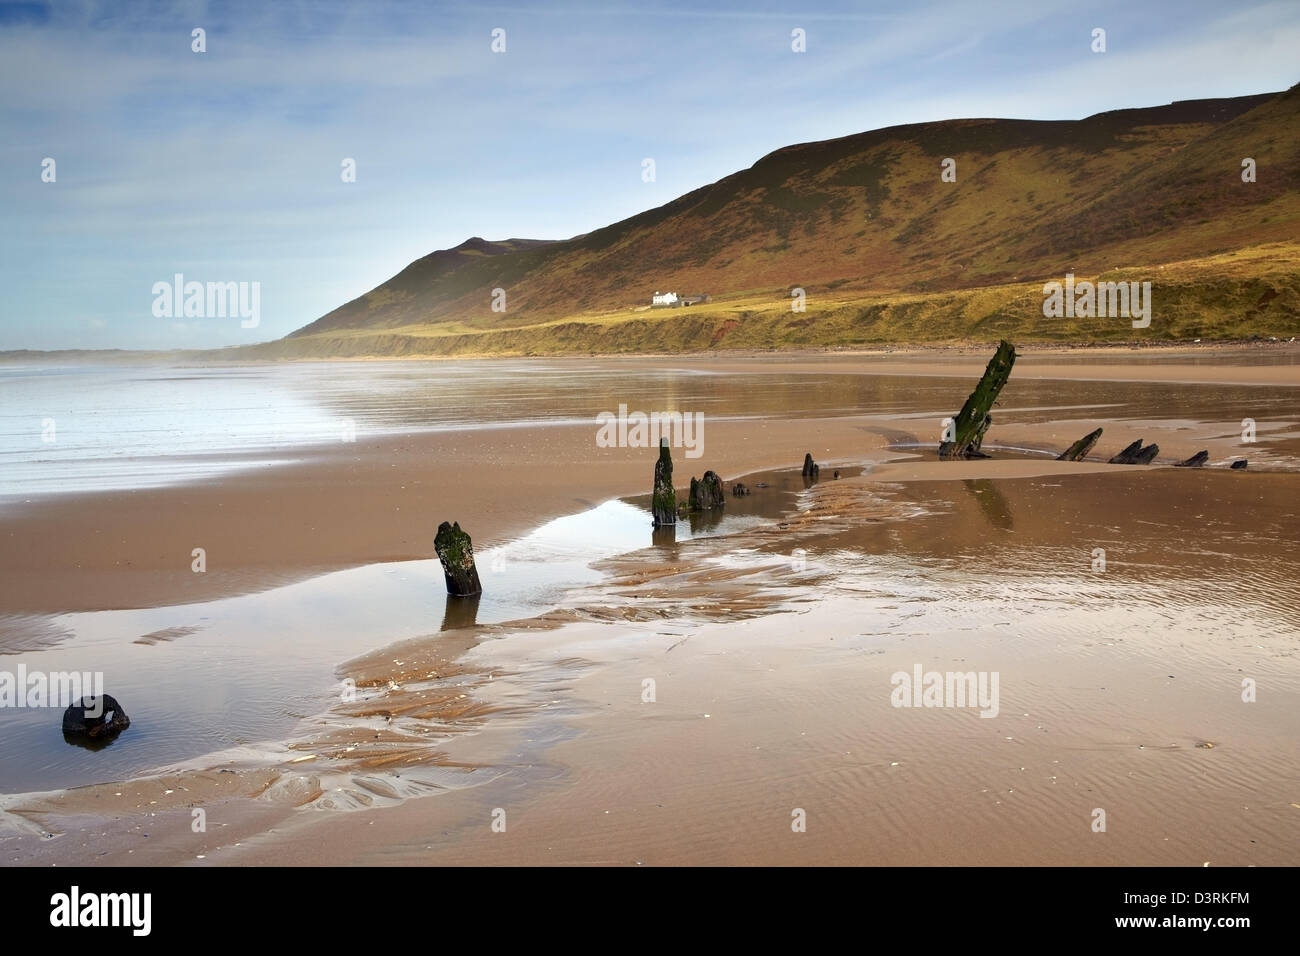 Helvetia wreck on Rhossili Bay, with Rhossili downs and the old Rectory behind, reflected in the wet sand. Winter. Stock Photo